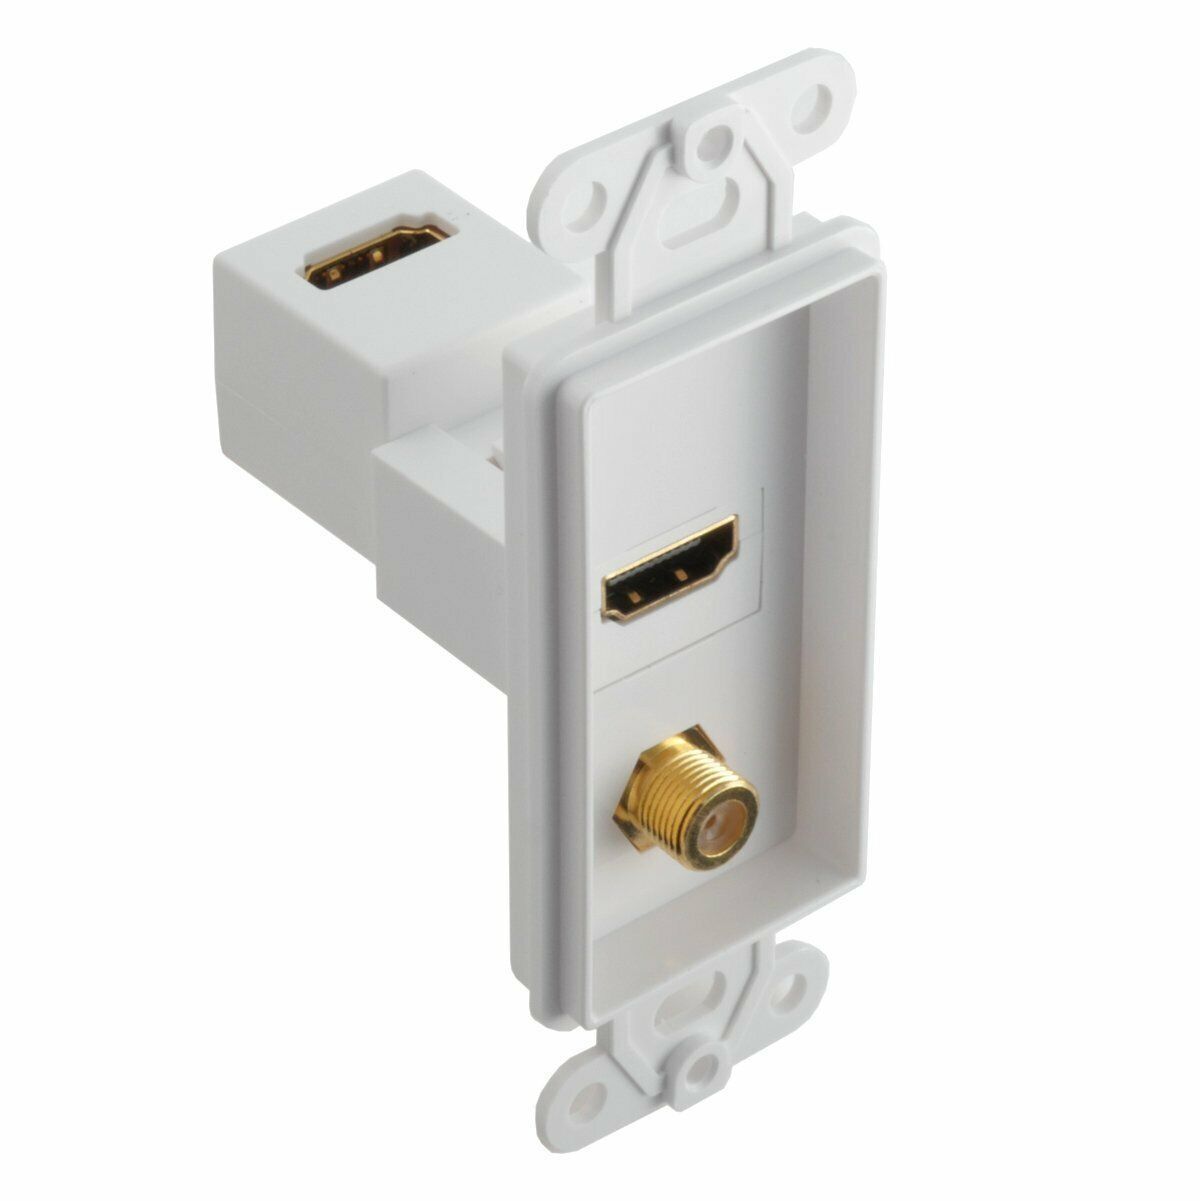 GE 87688 High Definition HDMI & Coax Wall Plate 1080p TV InWall Installation NEW - $9.89